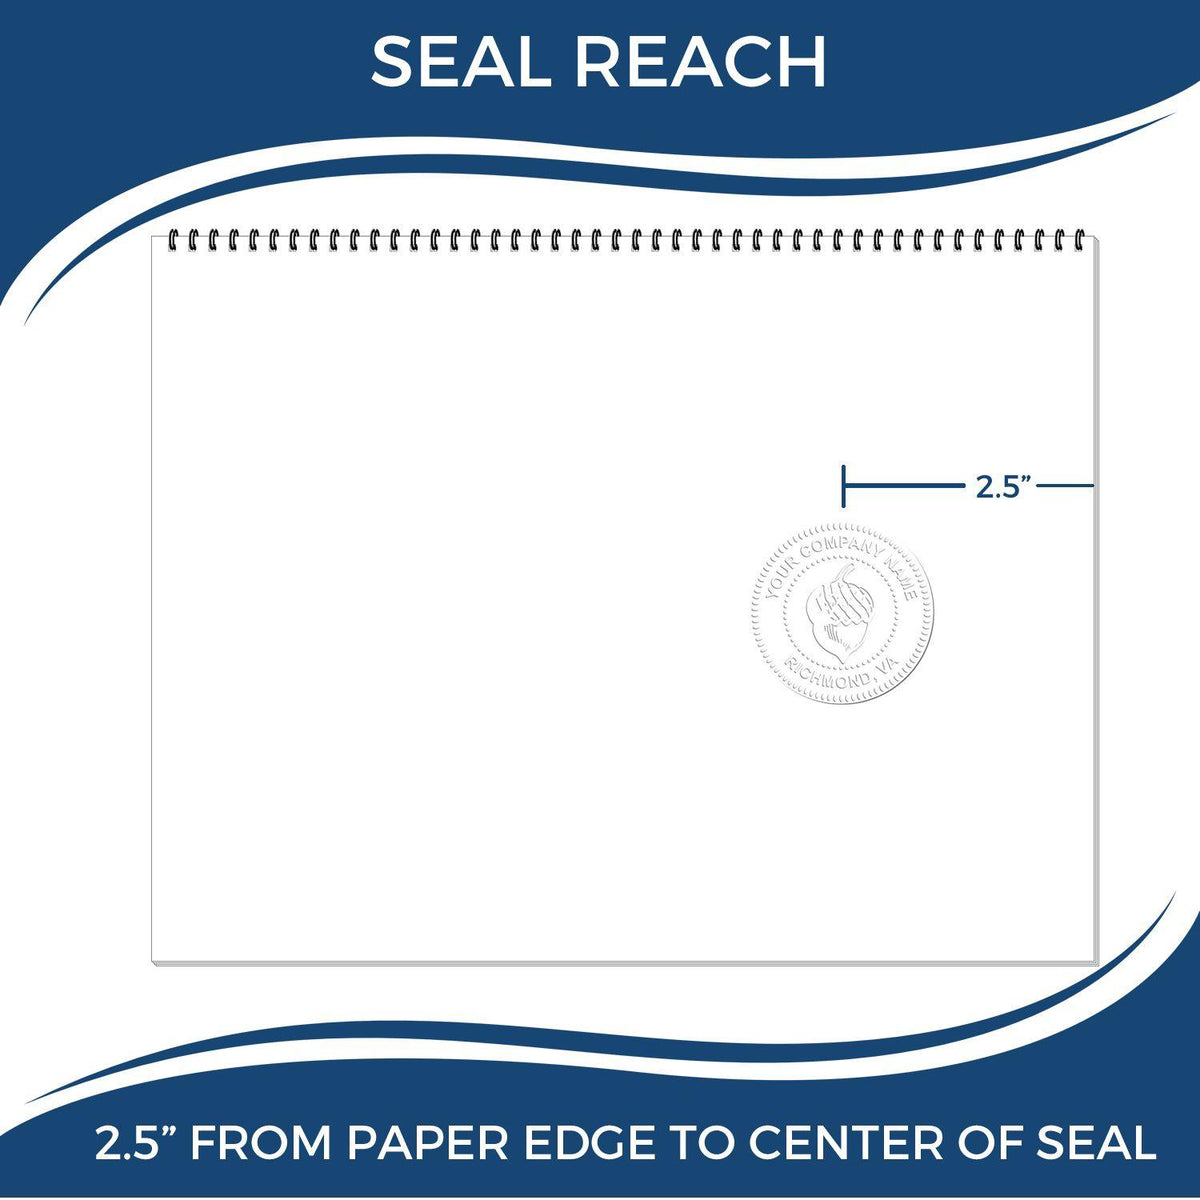 Geologist Long Reach Desk Seal Embosser - Engineer Seal Stamps - Embosser Type_Desk, Embosser Type_Long Reach, Type of Use_Professional, Use_Heavy Duty, validate-product-description